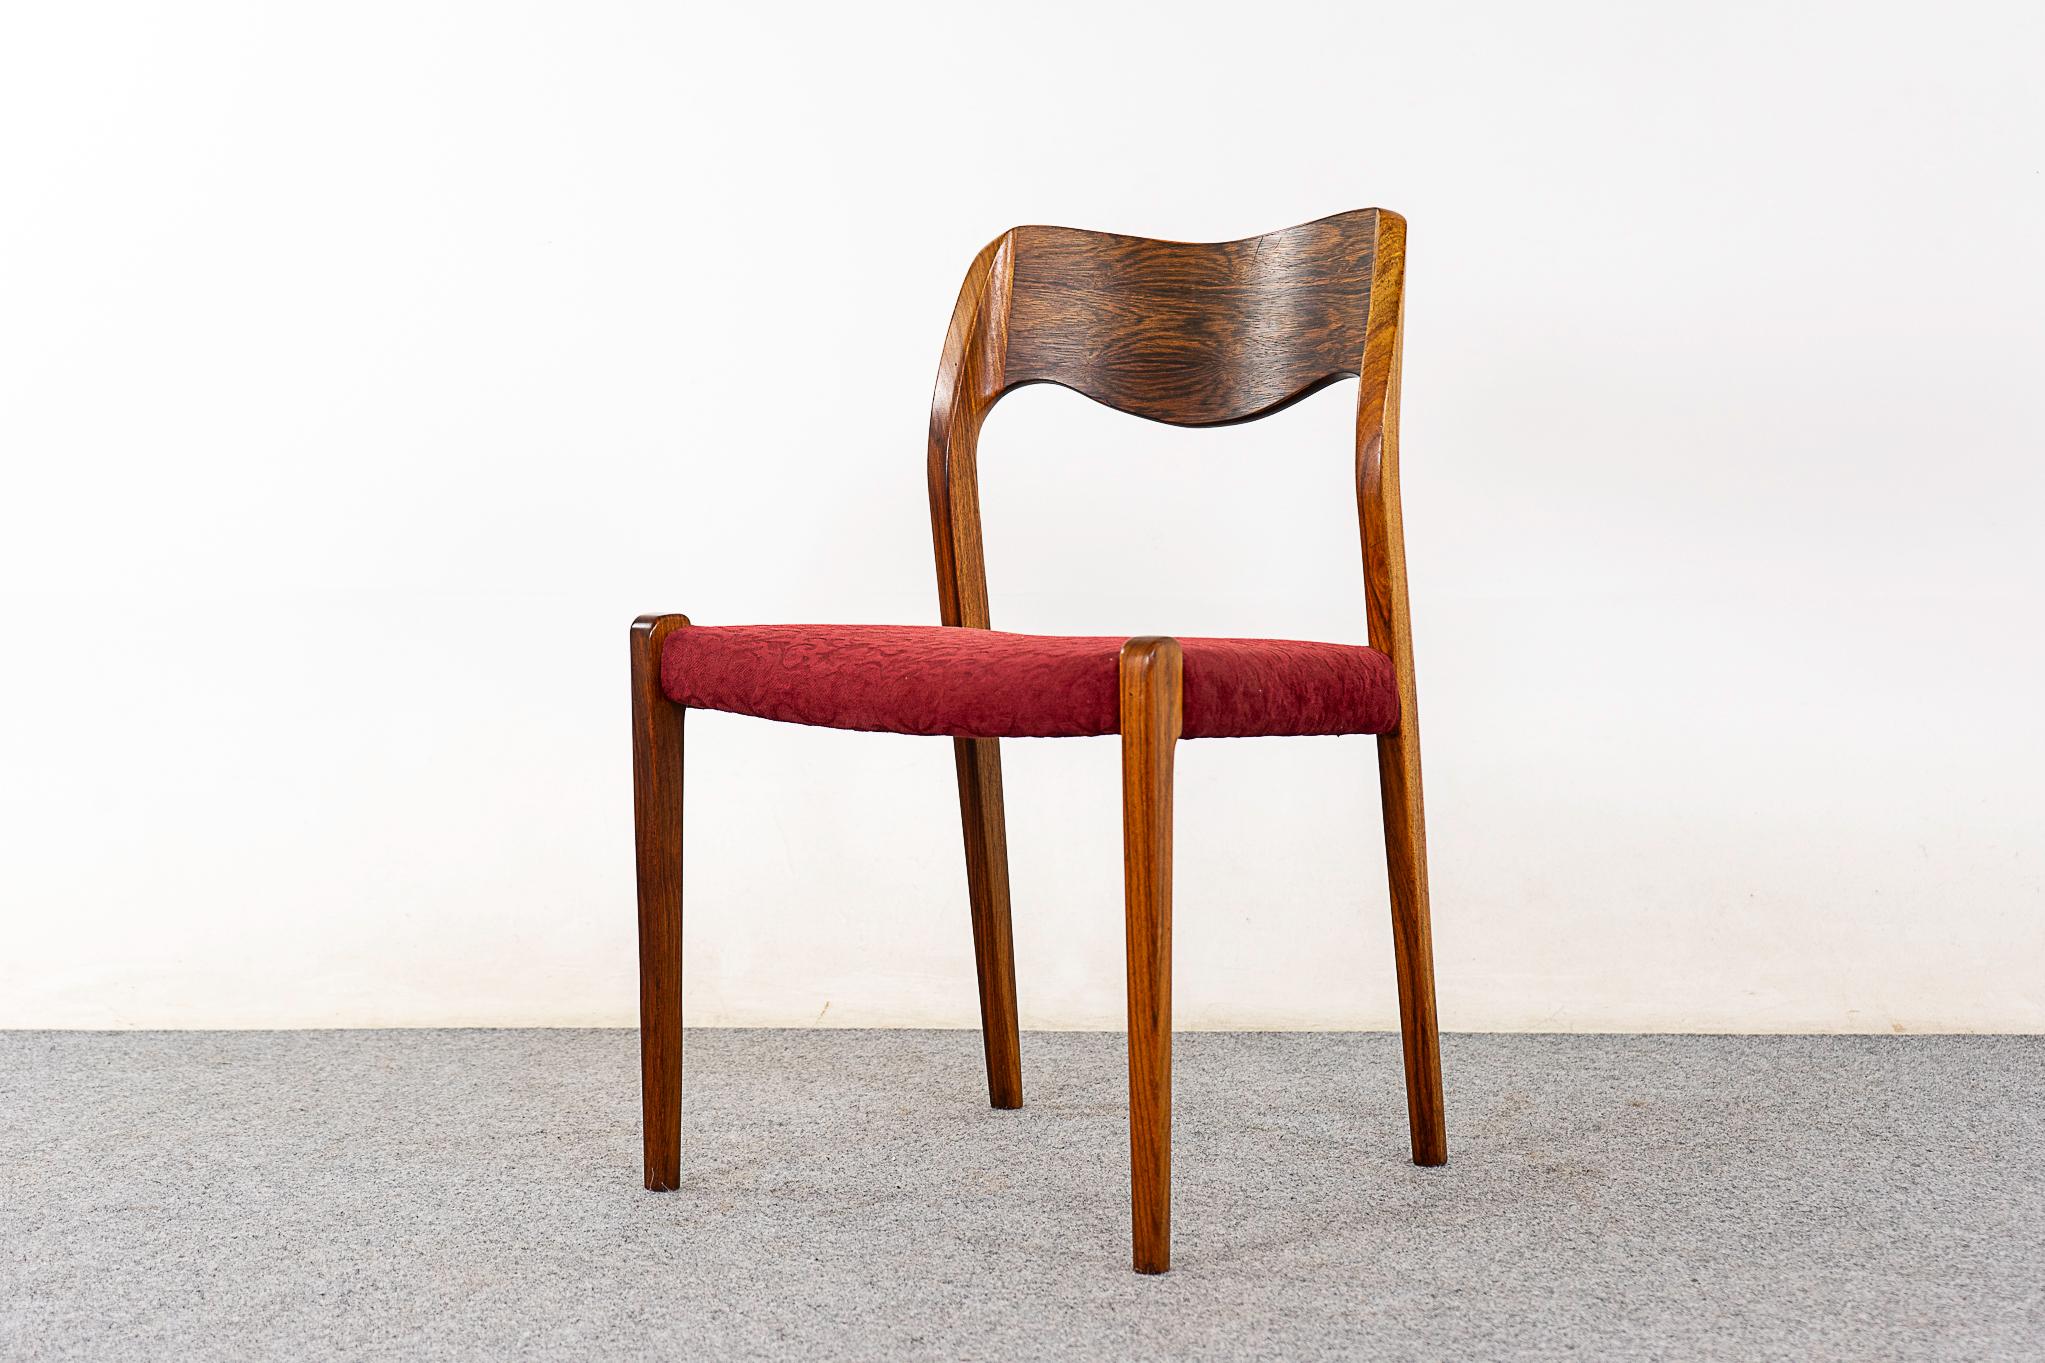 Rosewood Danish dining chairs by Niels Otto Moller for J.L Moller Mobelfabrik, circa 1960's. Highly sought after Model 71 design with signature curved backrest and elegant, graceful lines. Original upholstery with minor wear & tear.  

Unrestored